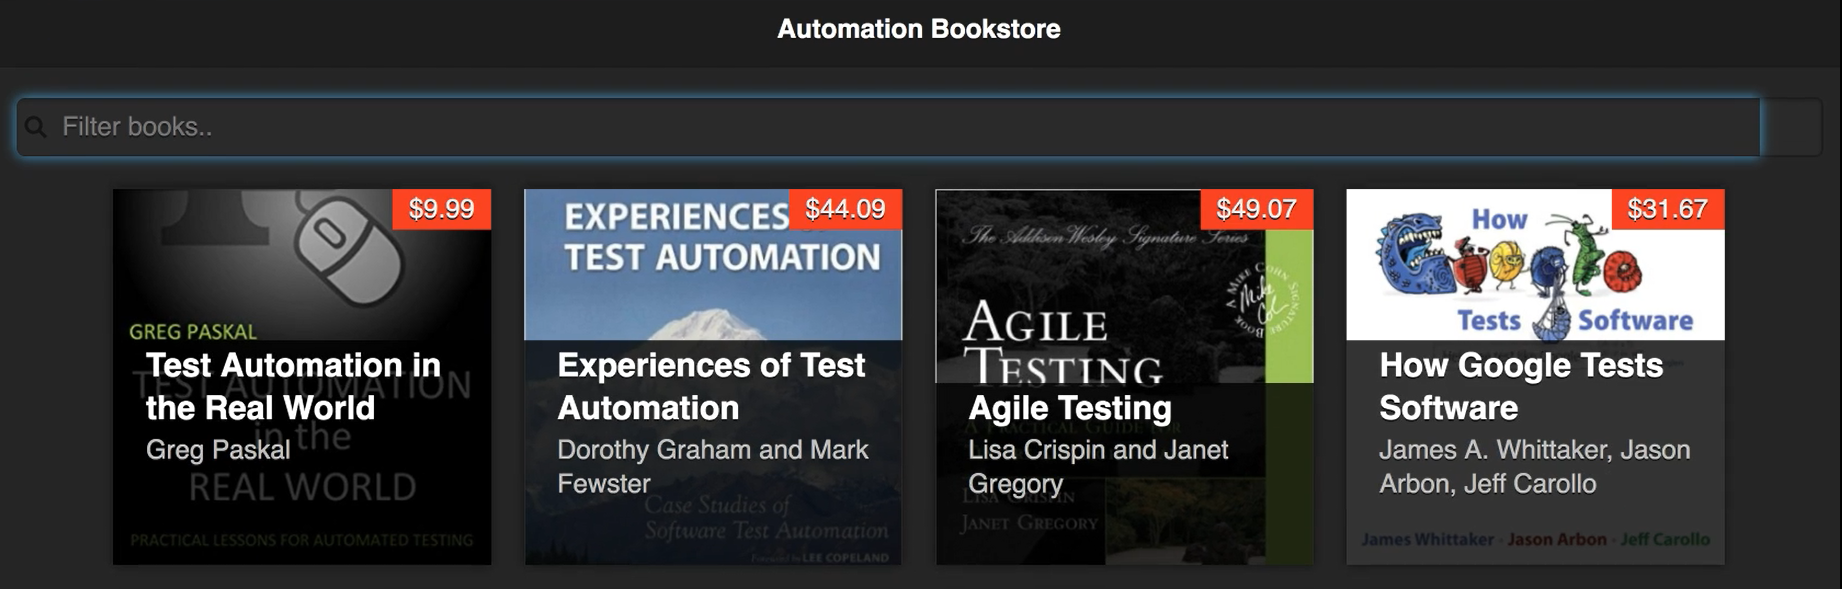 Automation Bookstore app with color change